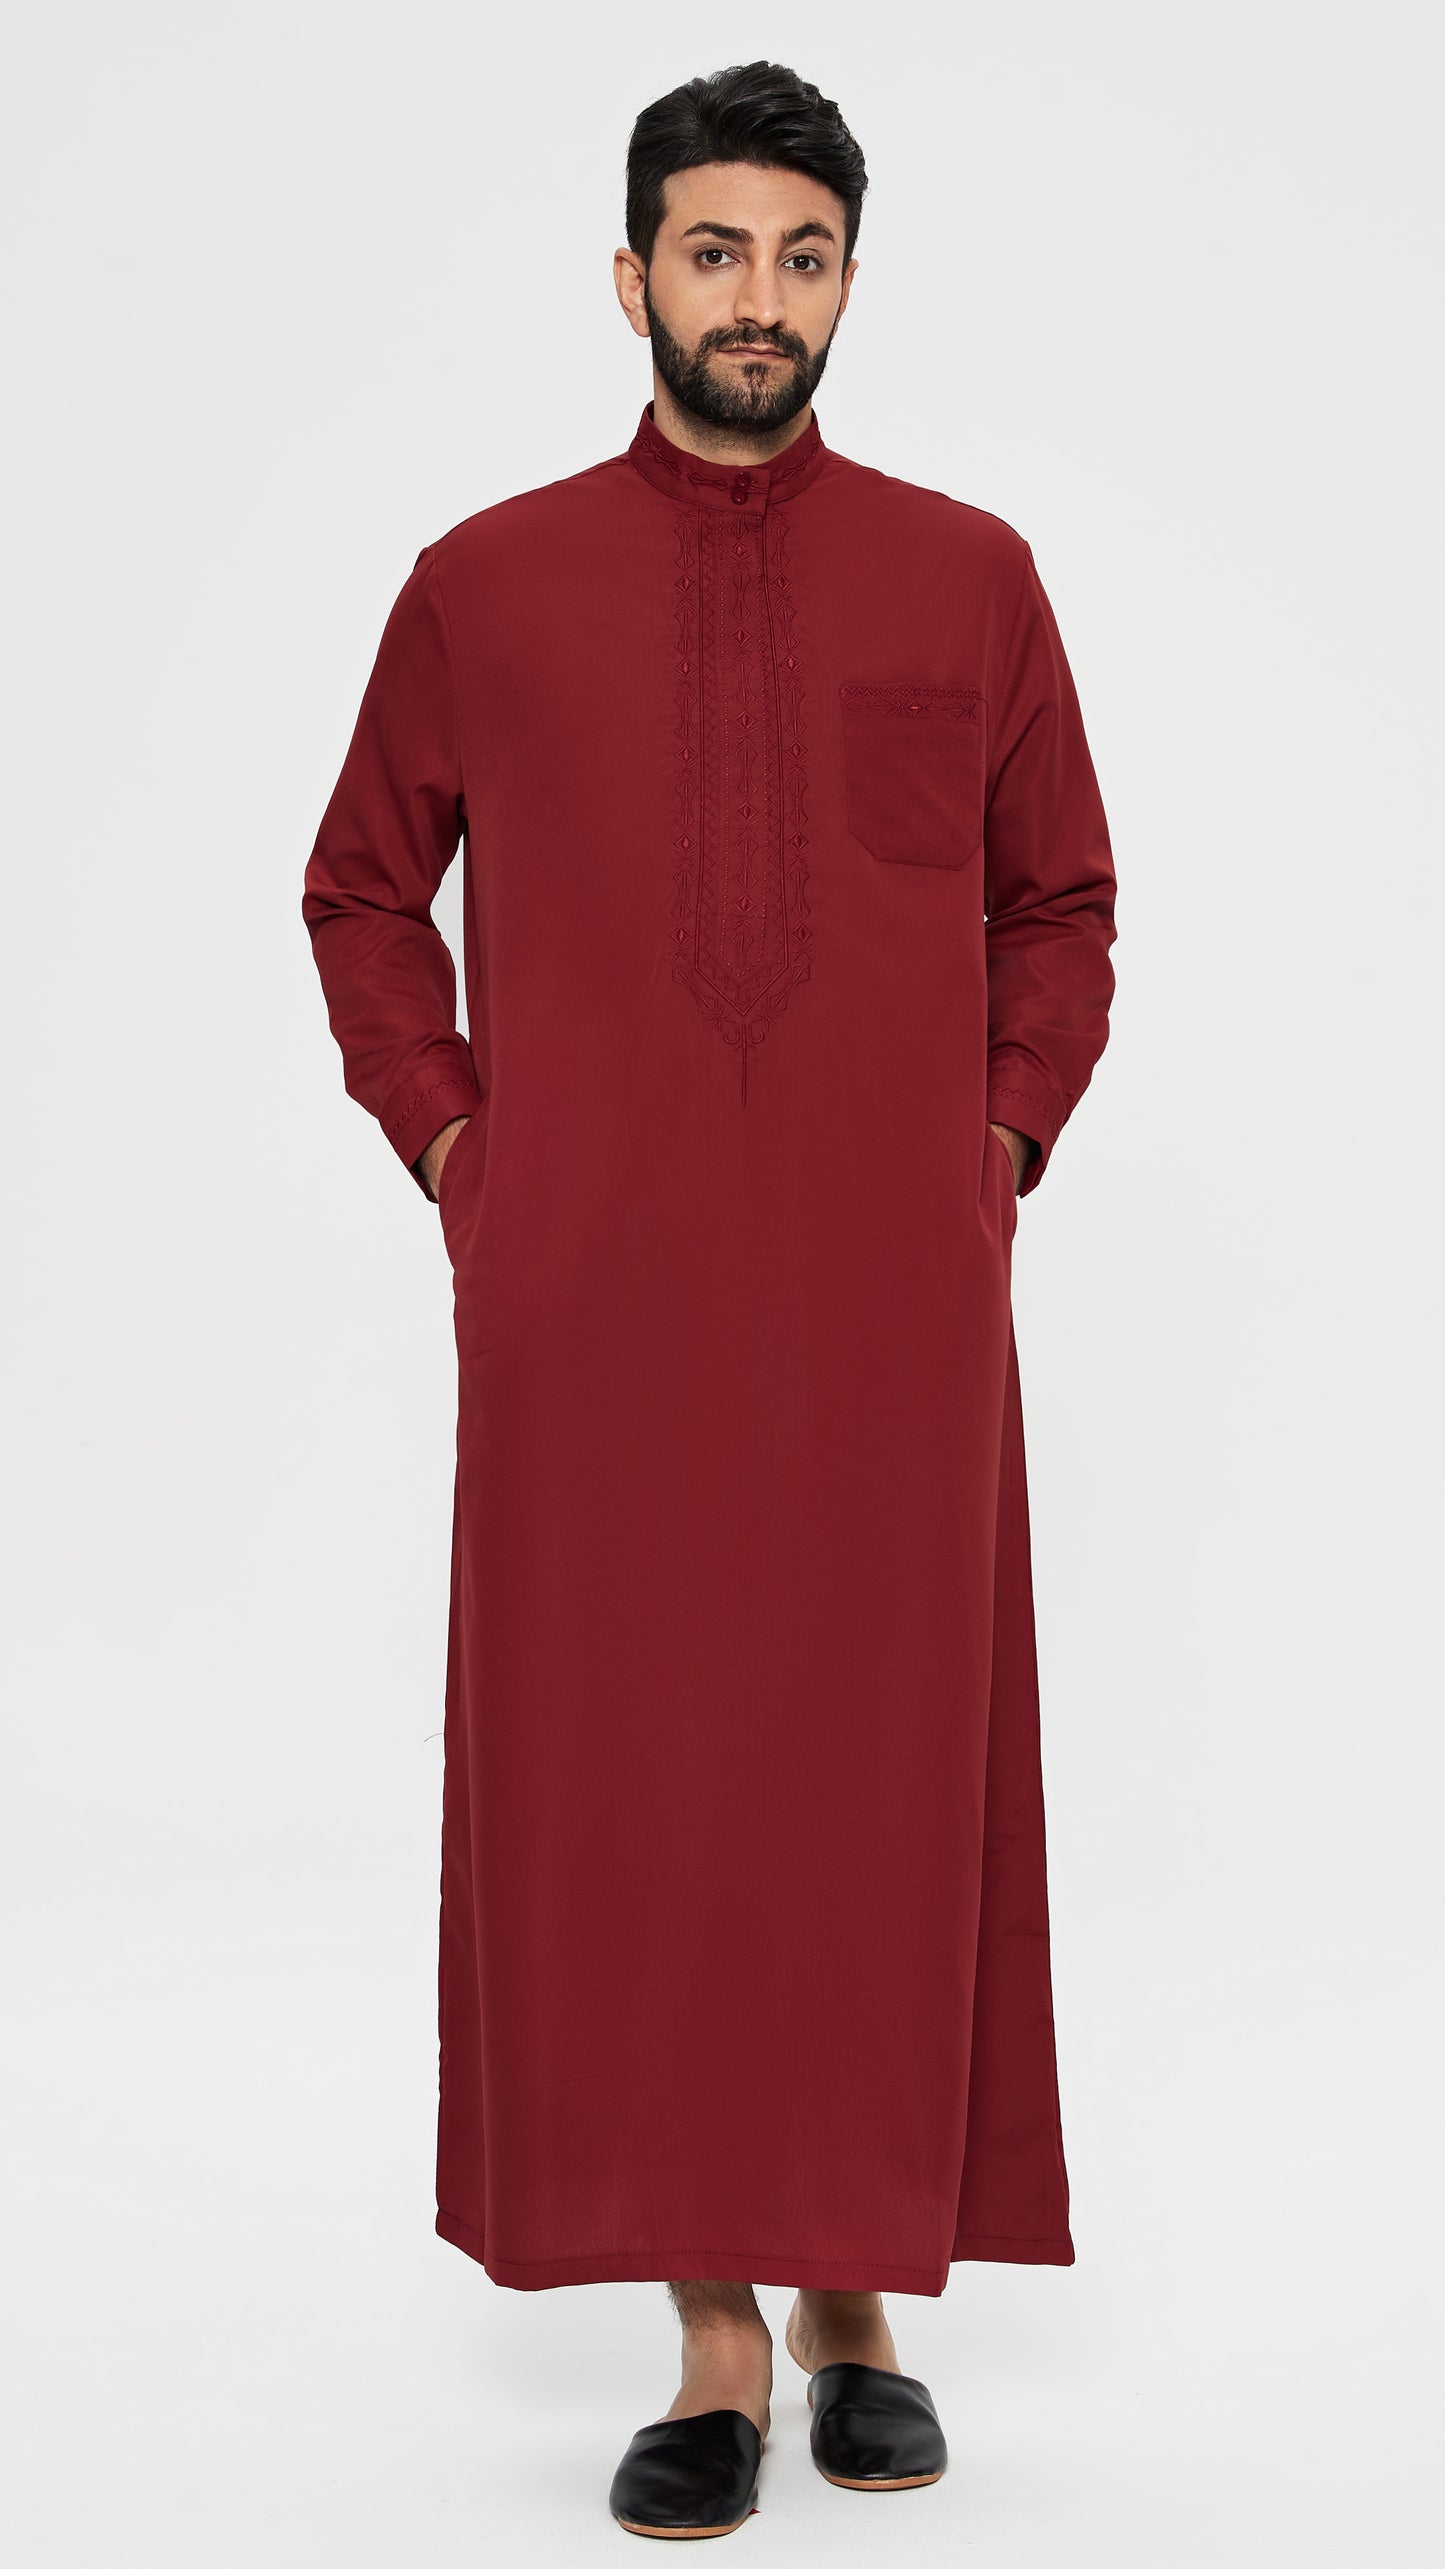 Qamis - Saudi Burgundy with chest embroidery